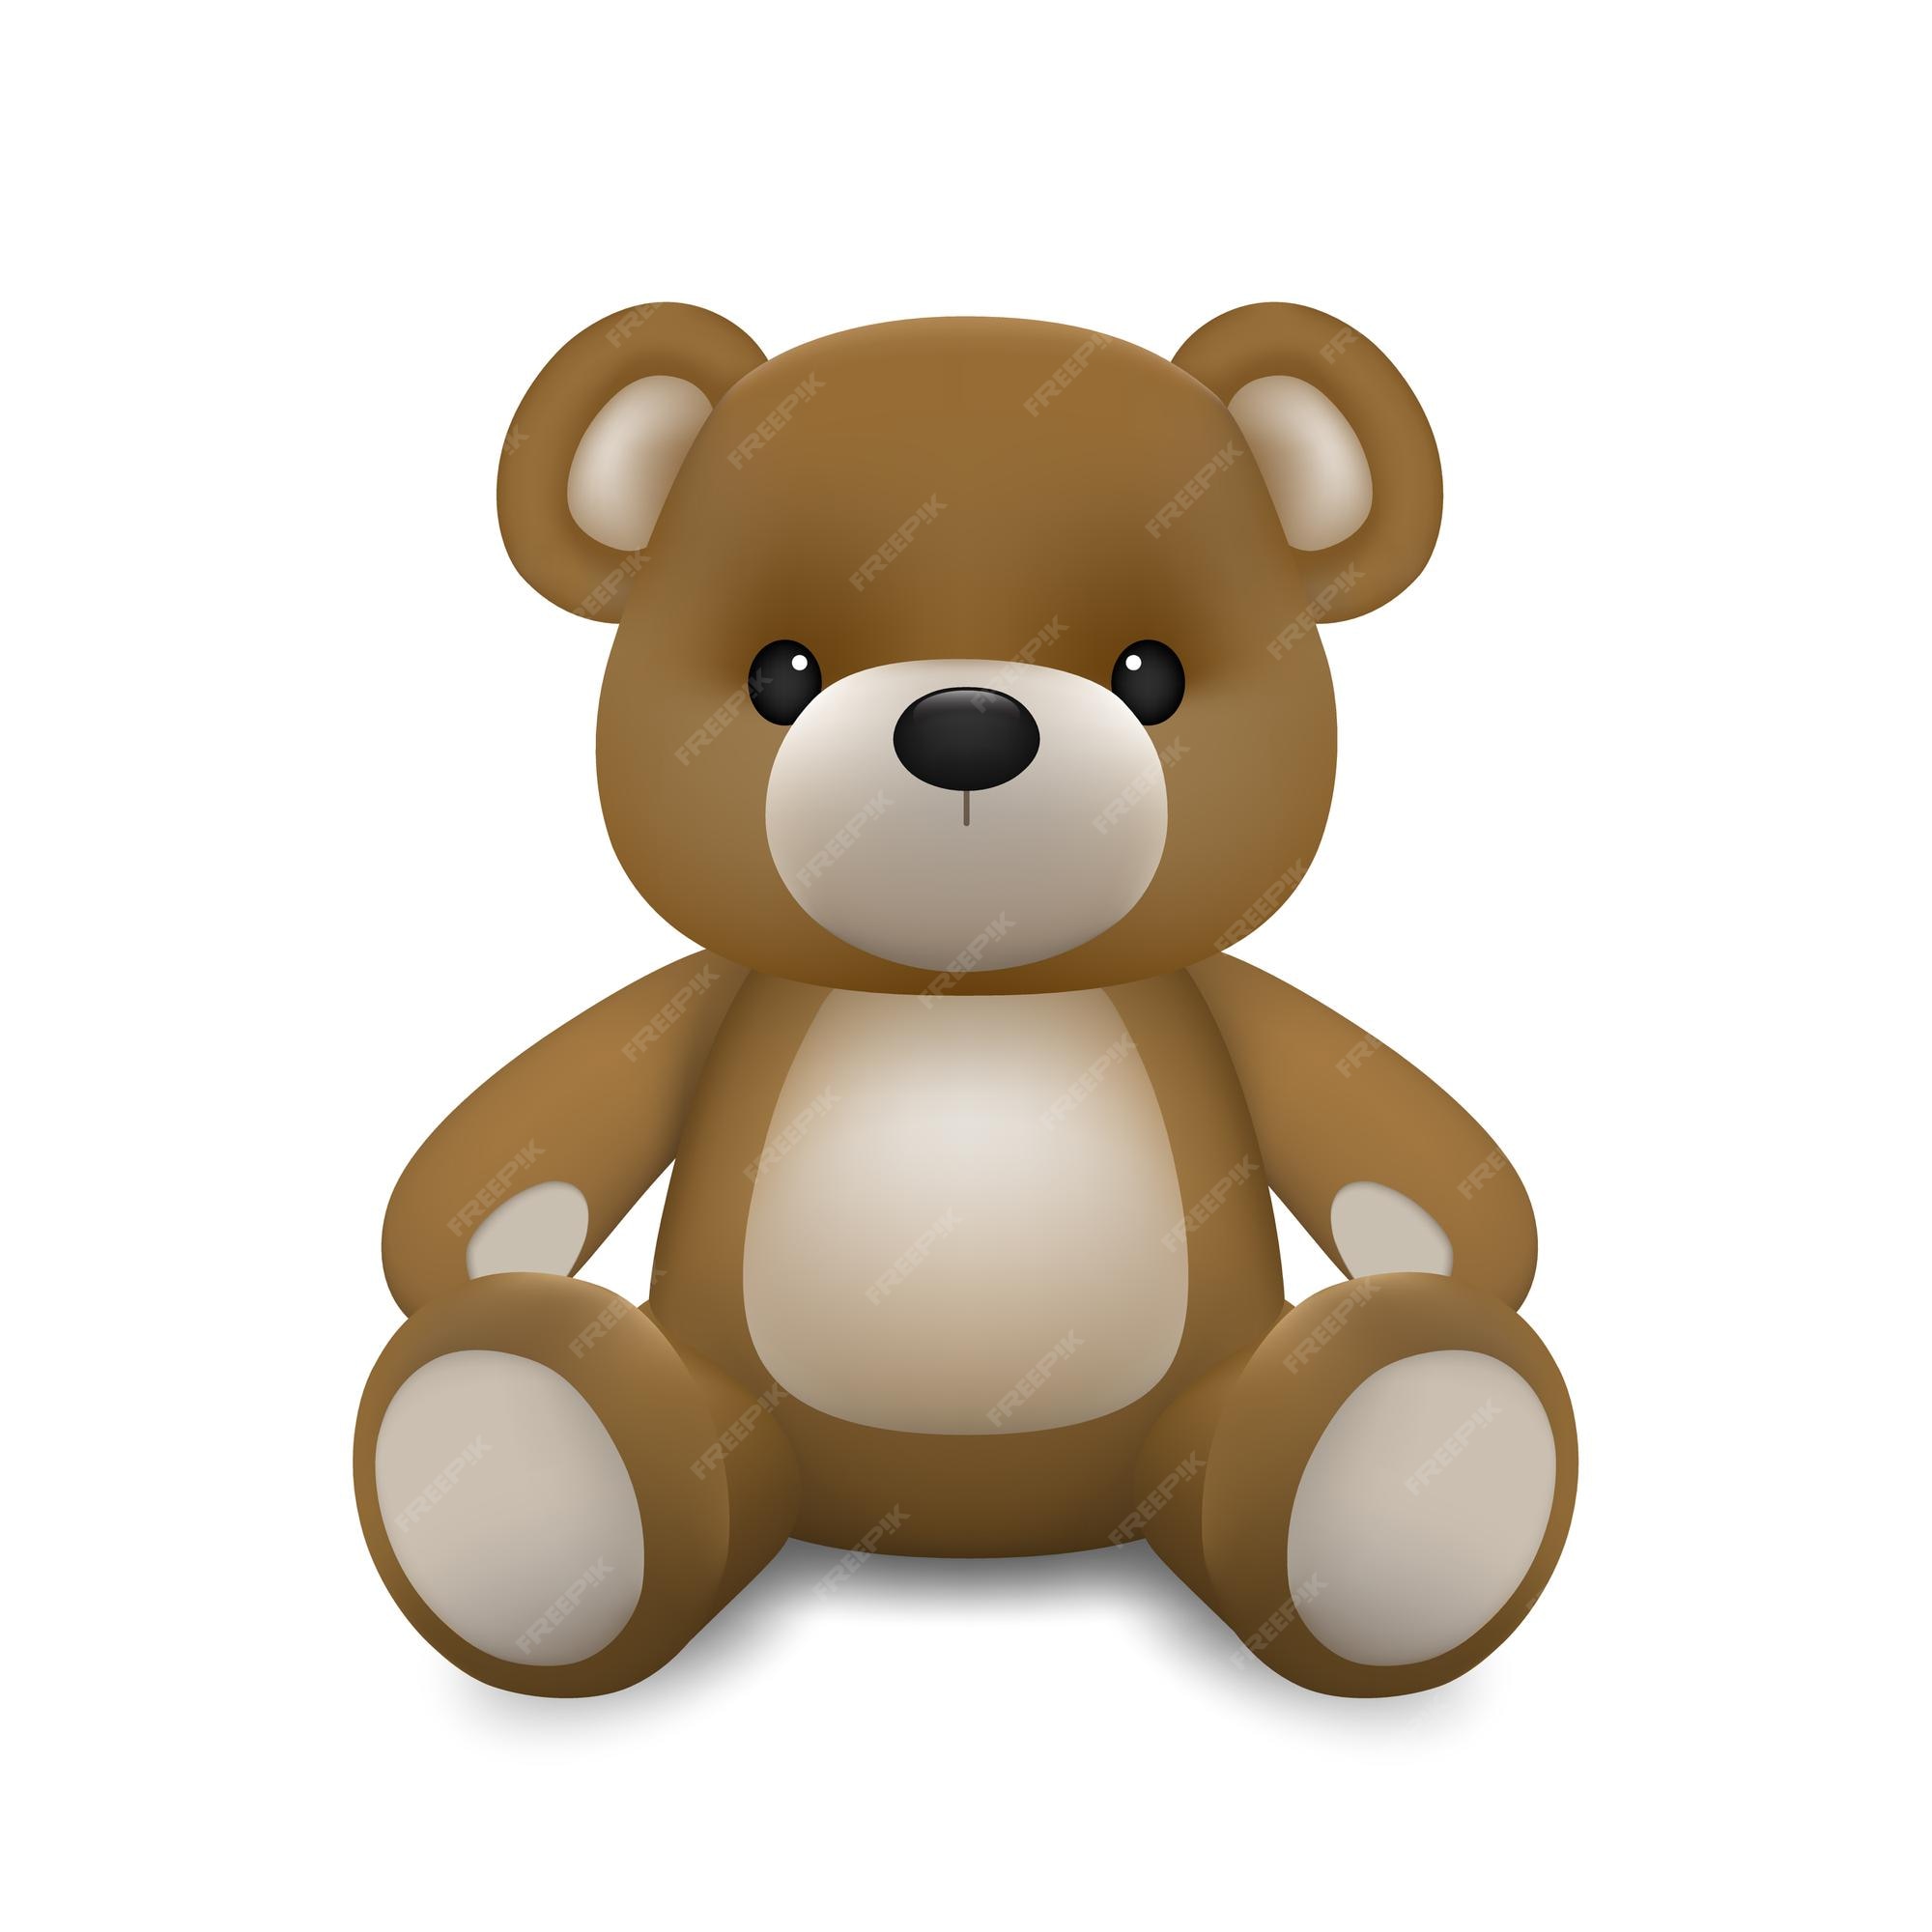 Premium Vector | Realistic little cute baby bear doll character sitting on  the ground isolated on white background. an animal bear cartoon relaxing  gesture.